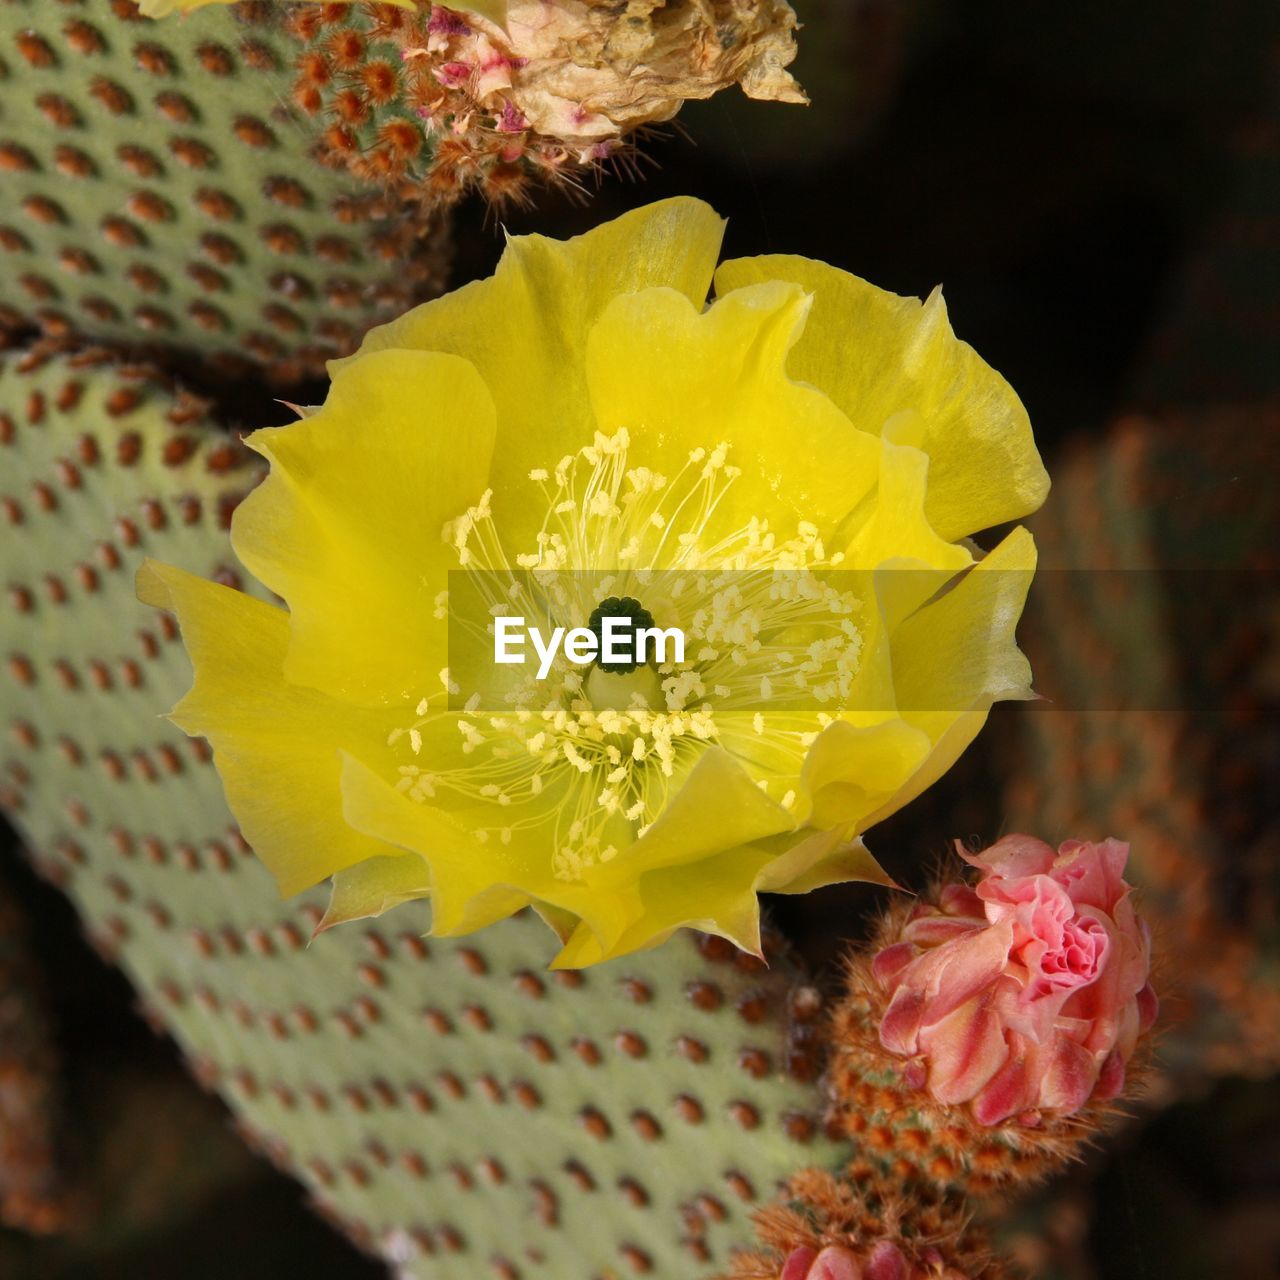 CLOSE-UP OF YELLOW LILY BLOOMING ON CACTUS